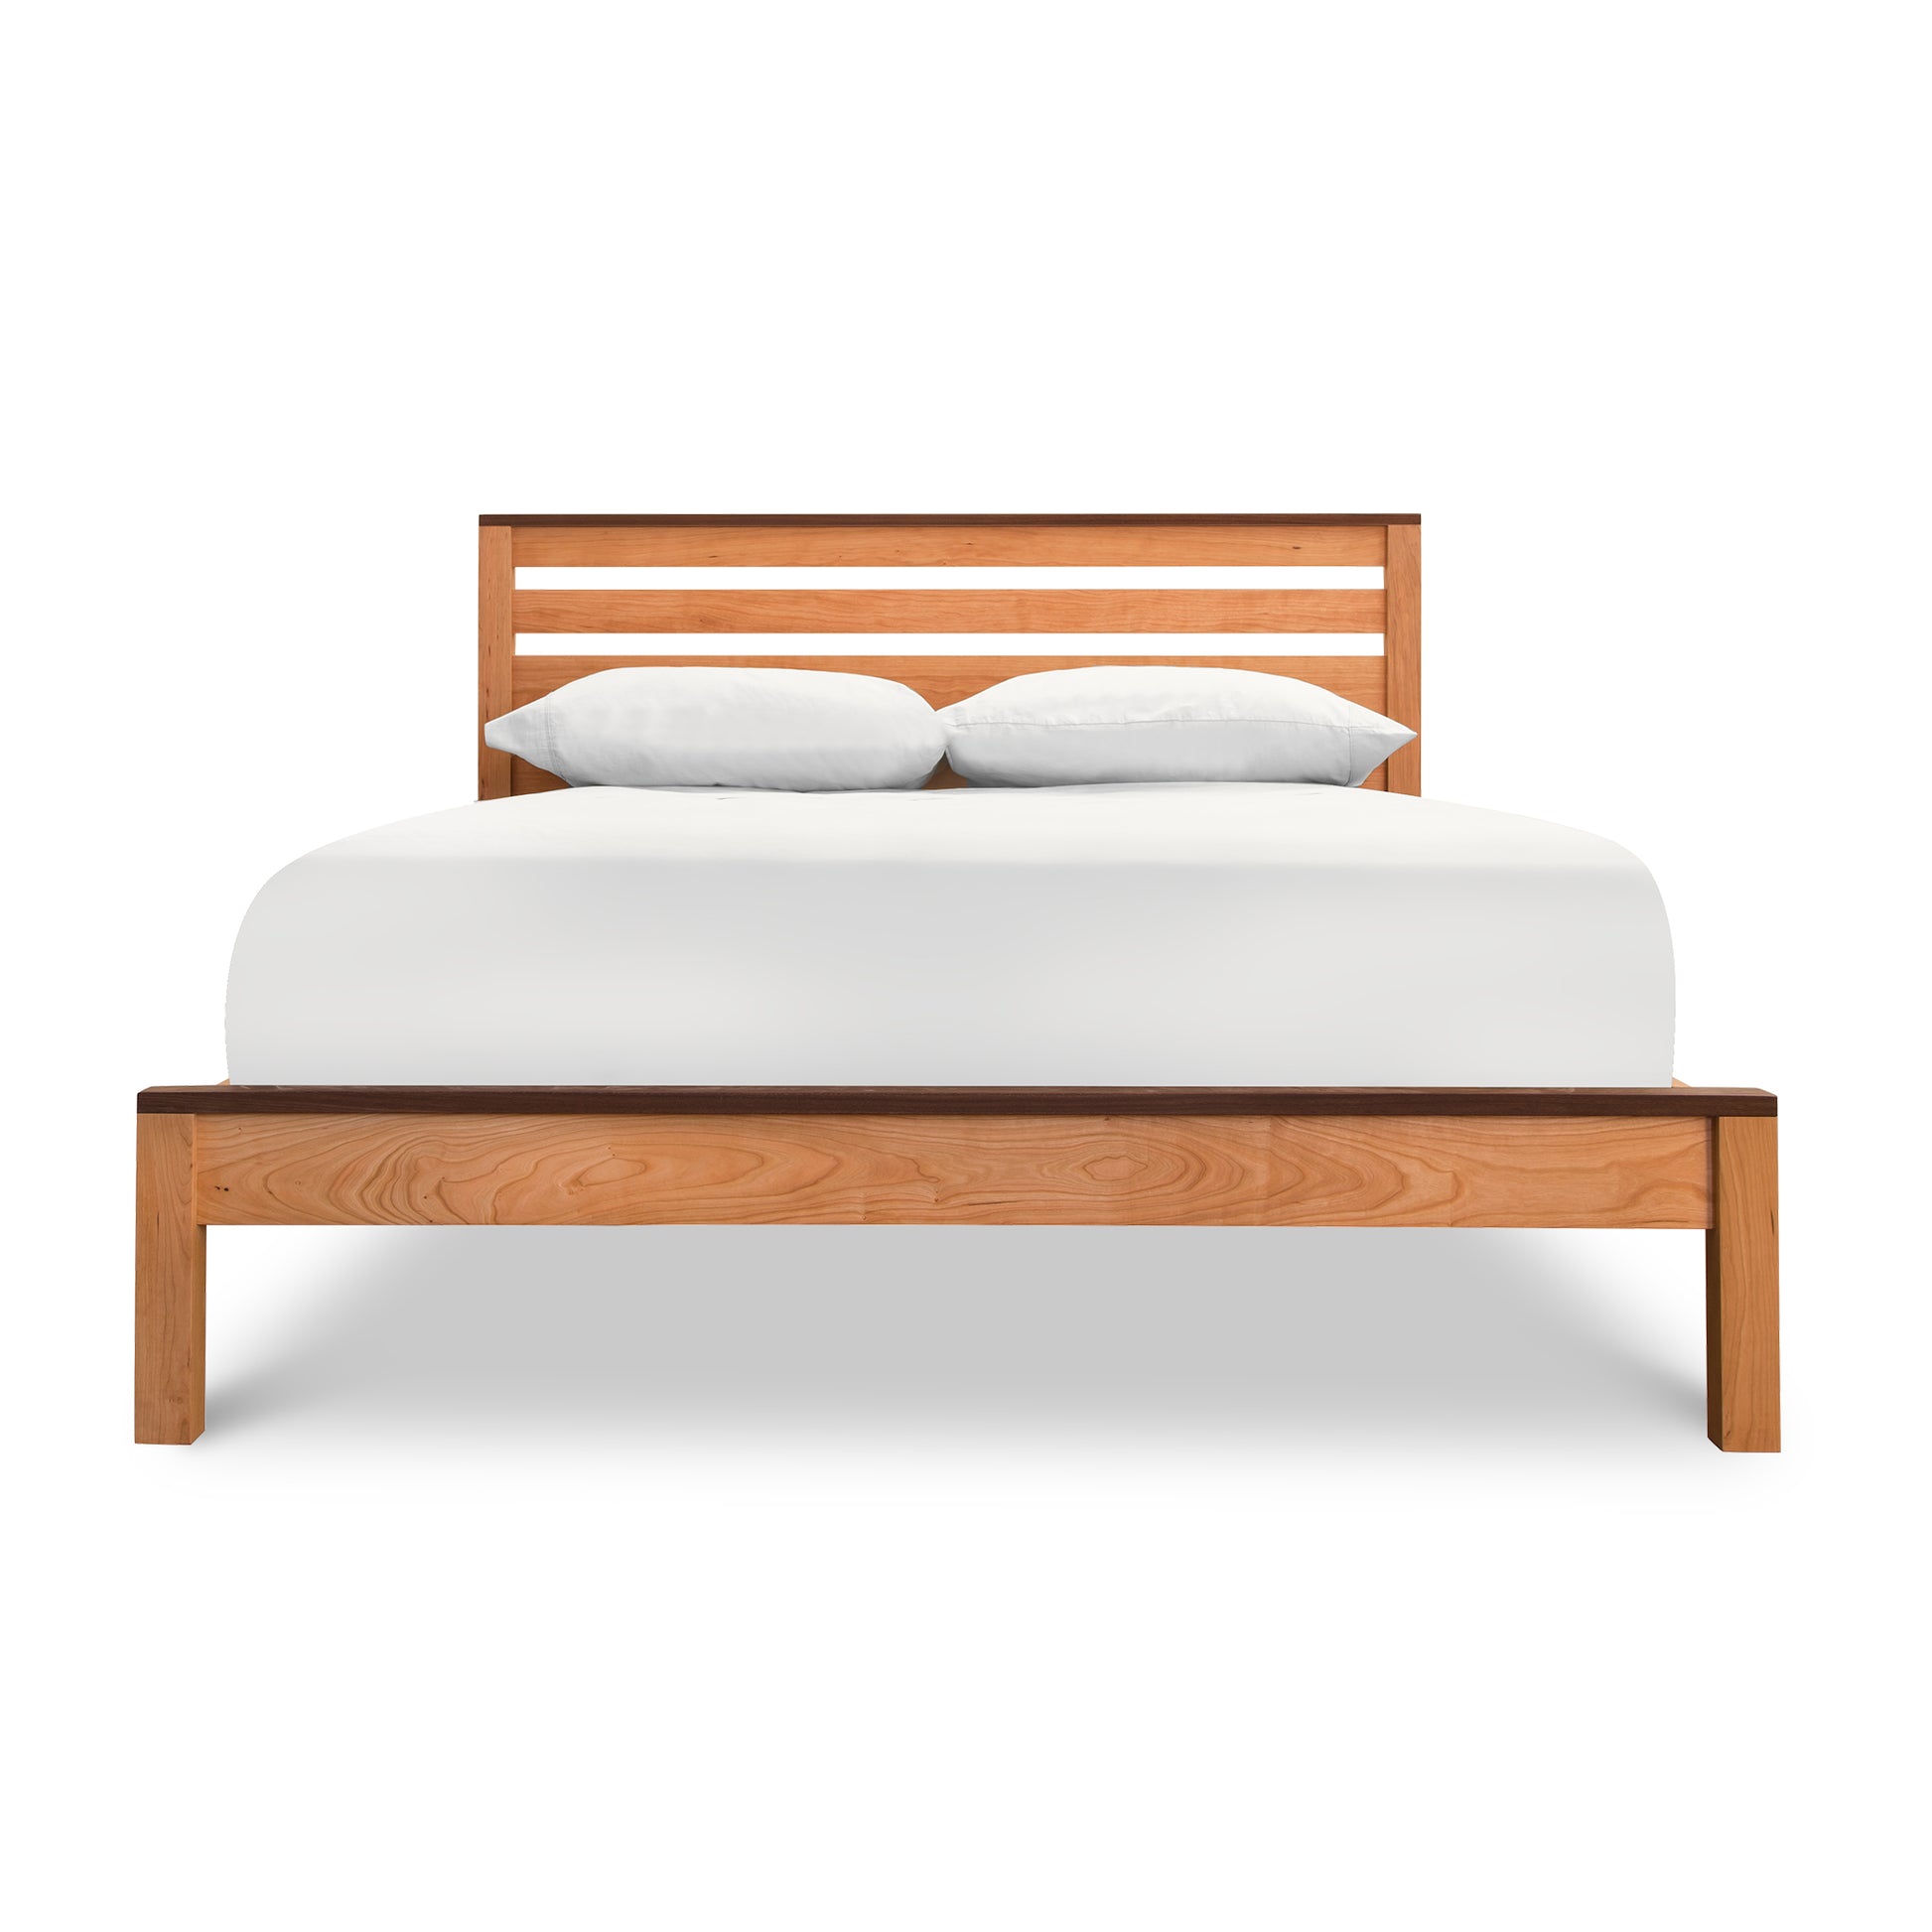 Skyline Panel Bed with a headboard, featuring a white mattress and two pillows, crafted from solid Cherry for an eco-friendly platform bed design by Vermont Furniture Designs.